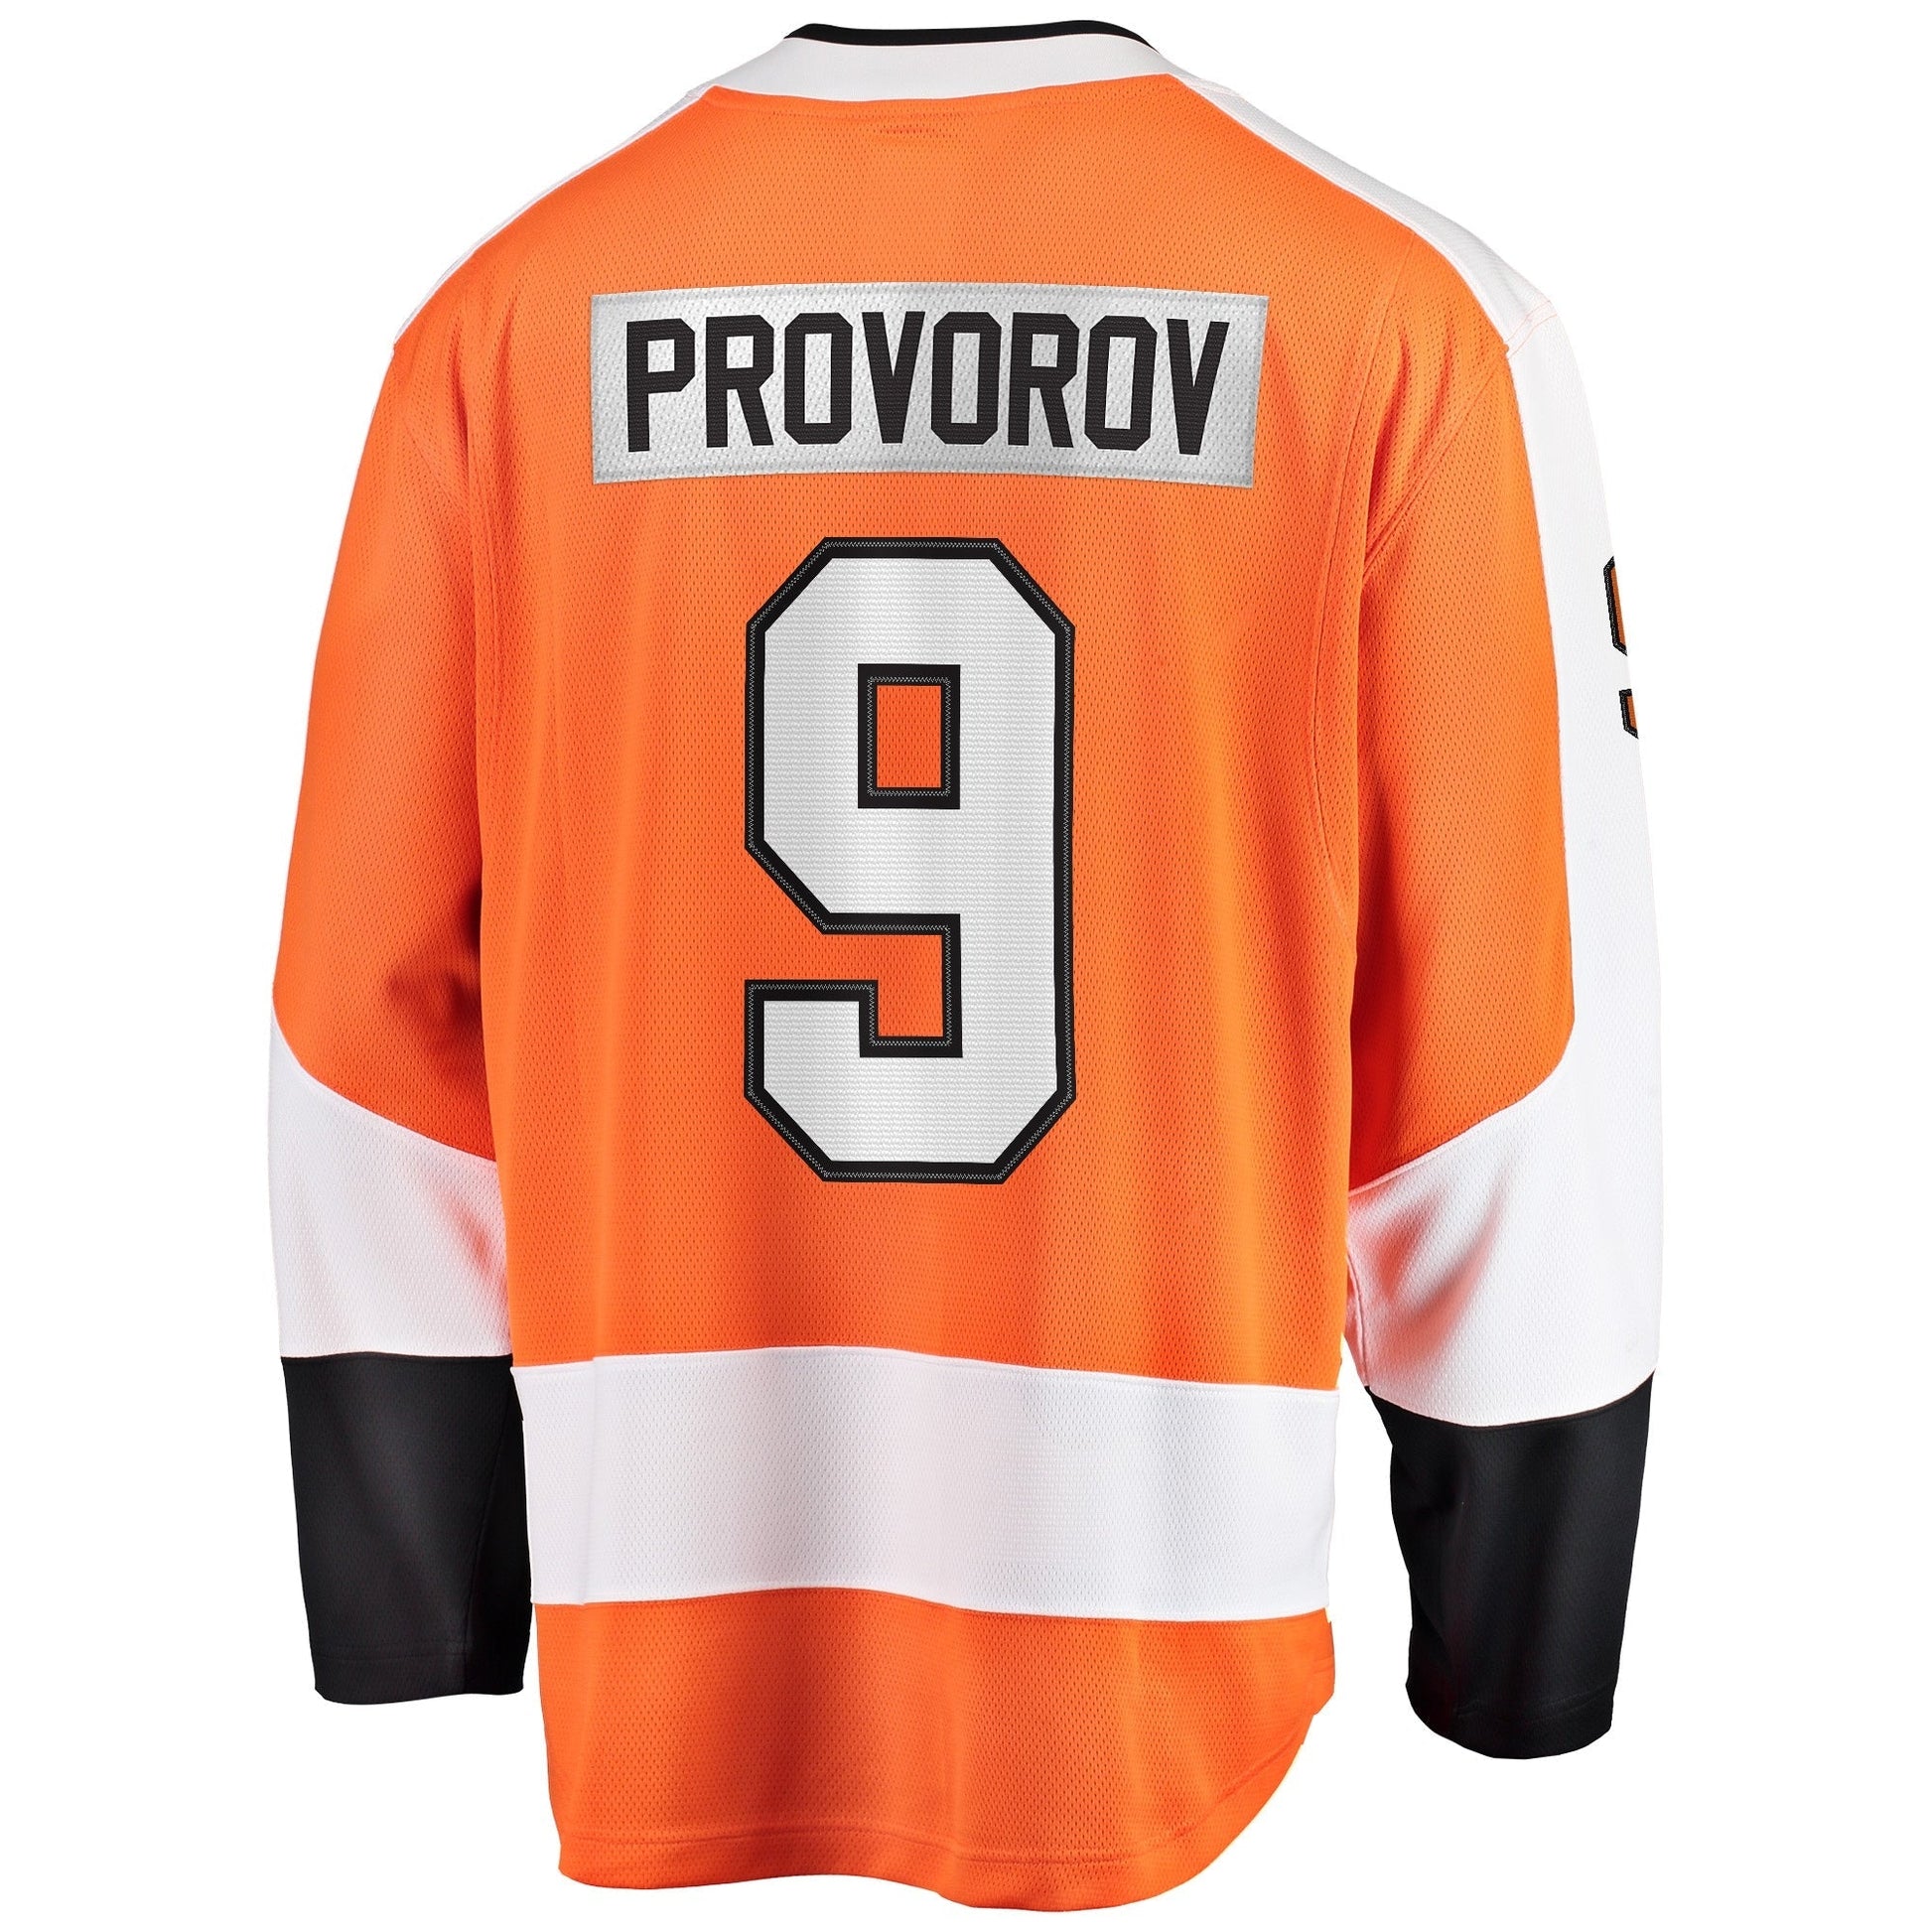 Philadelphia Flyers' Ivan Provorov Jerseys Continue To Sell Out